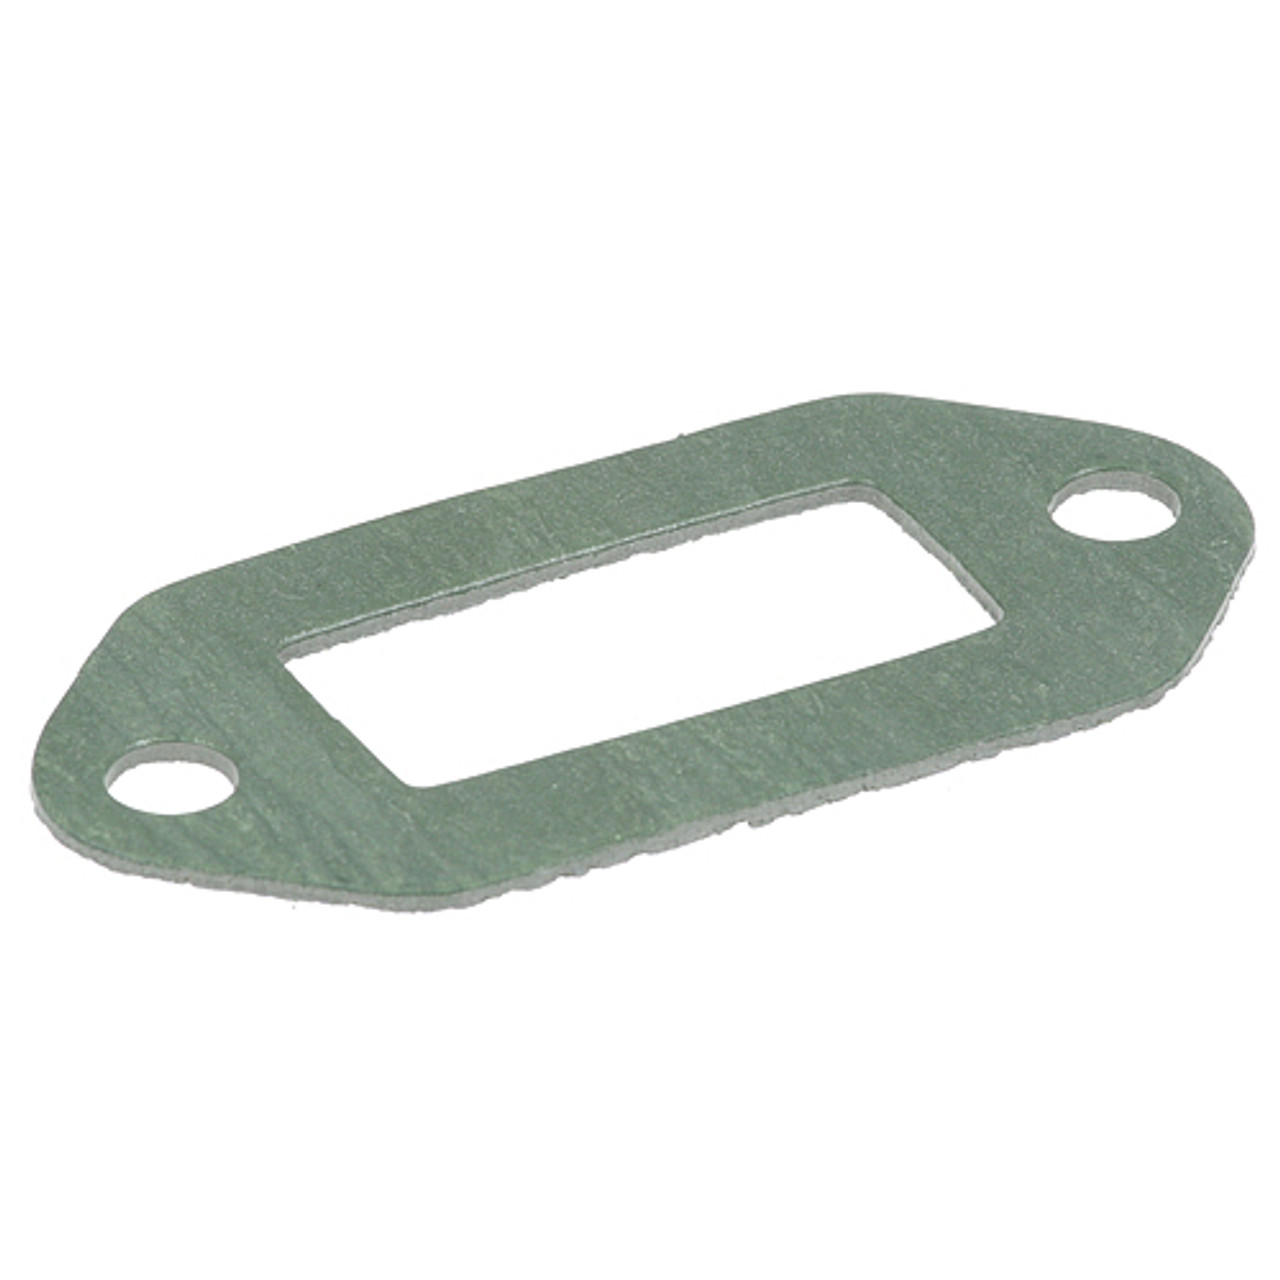 Gasket 3-3/4" X 1-13/16" - Replacement Part For Montague 45B